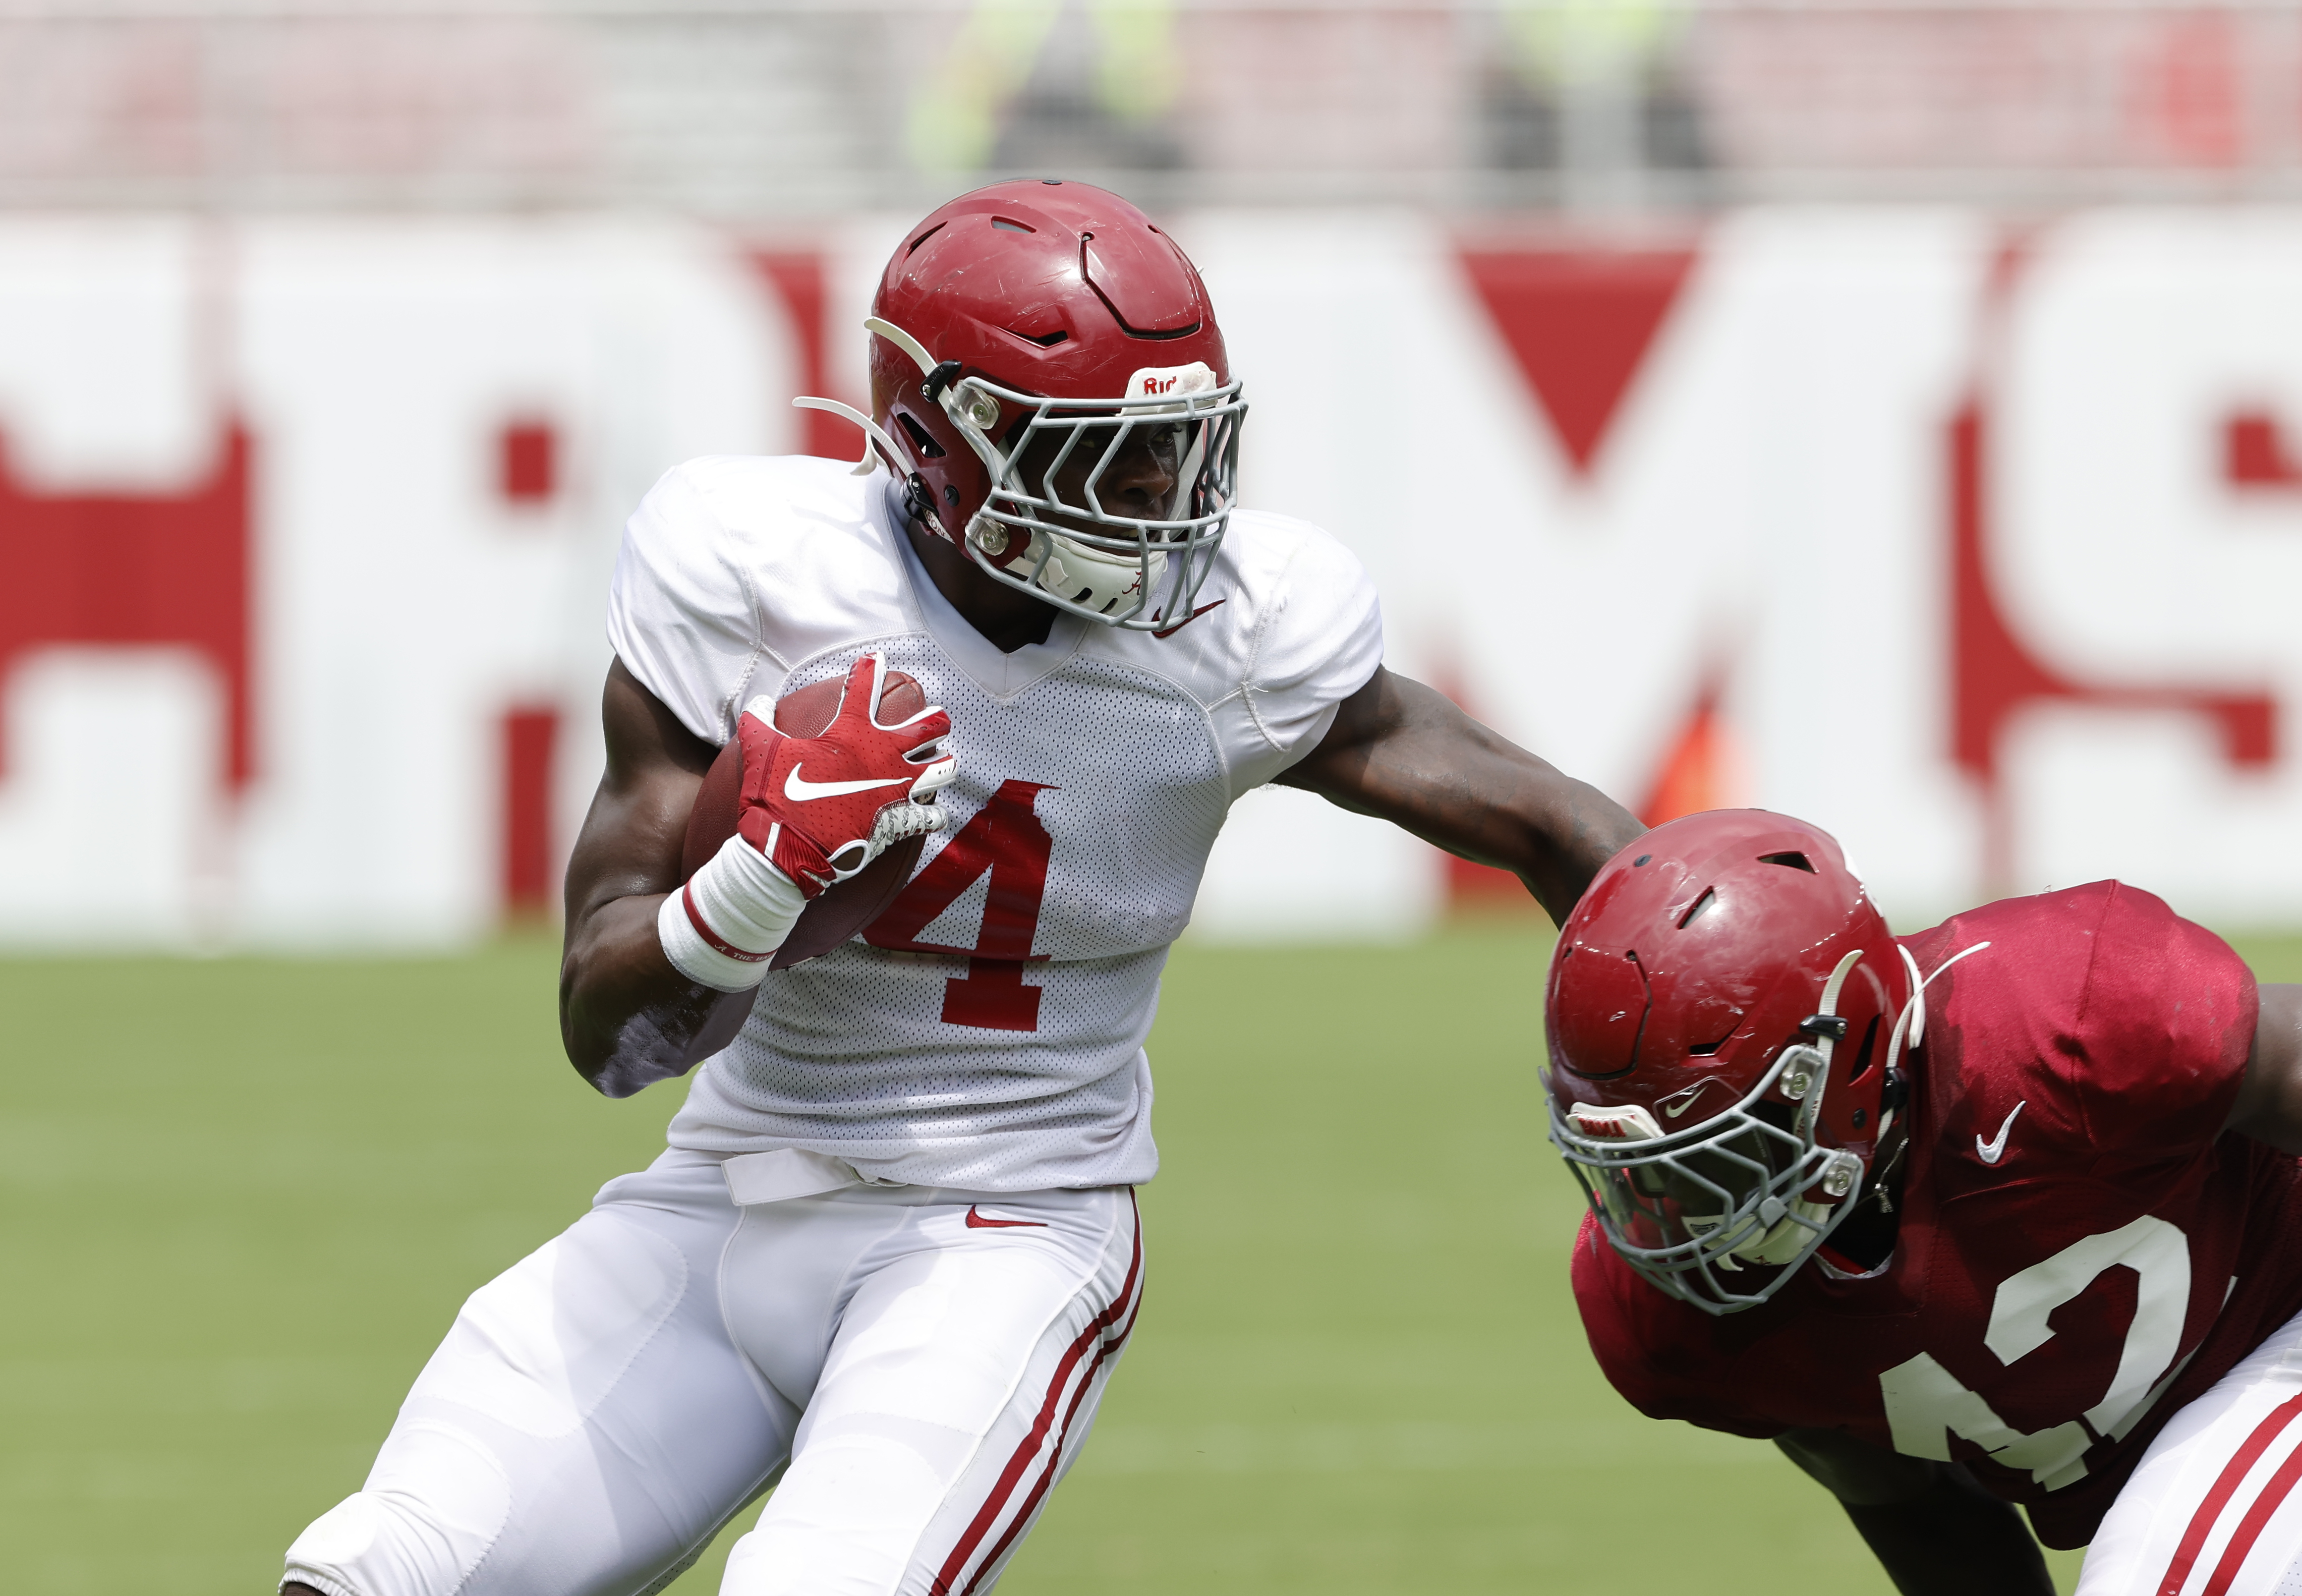 First Scrimmage Gives Alabama Snapshot of Team's Progress